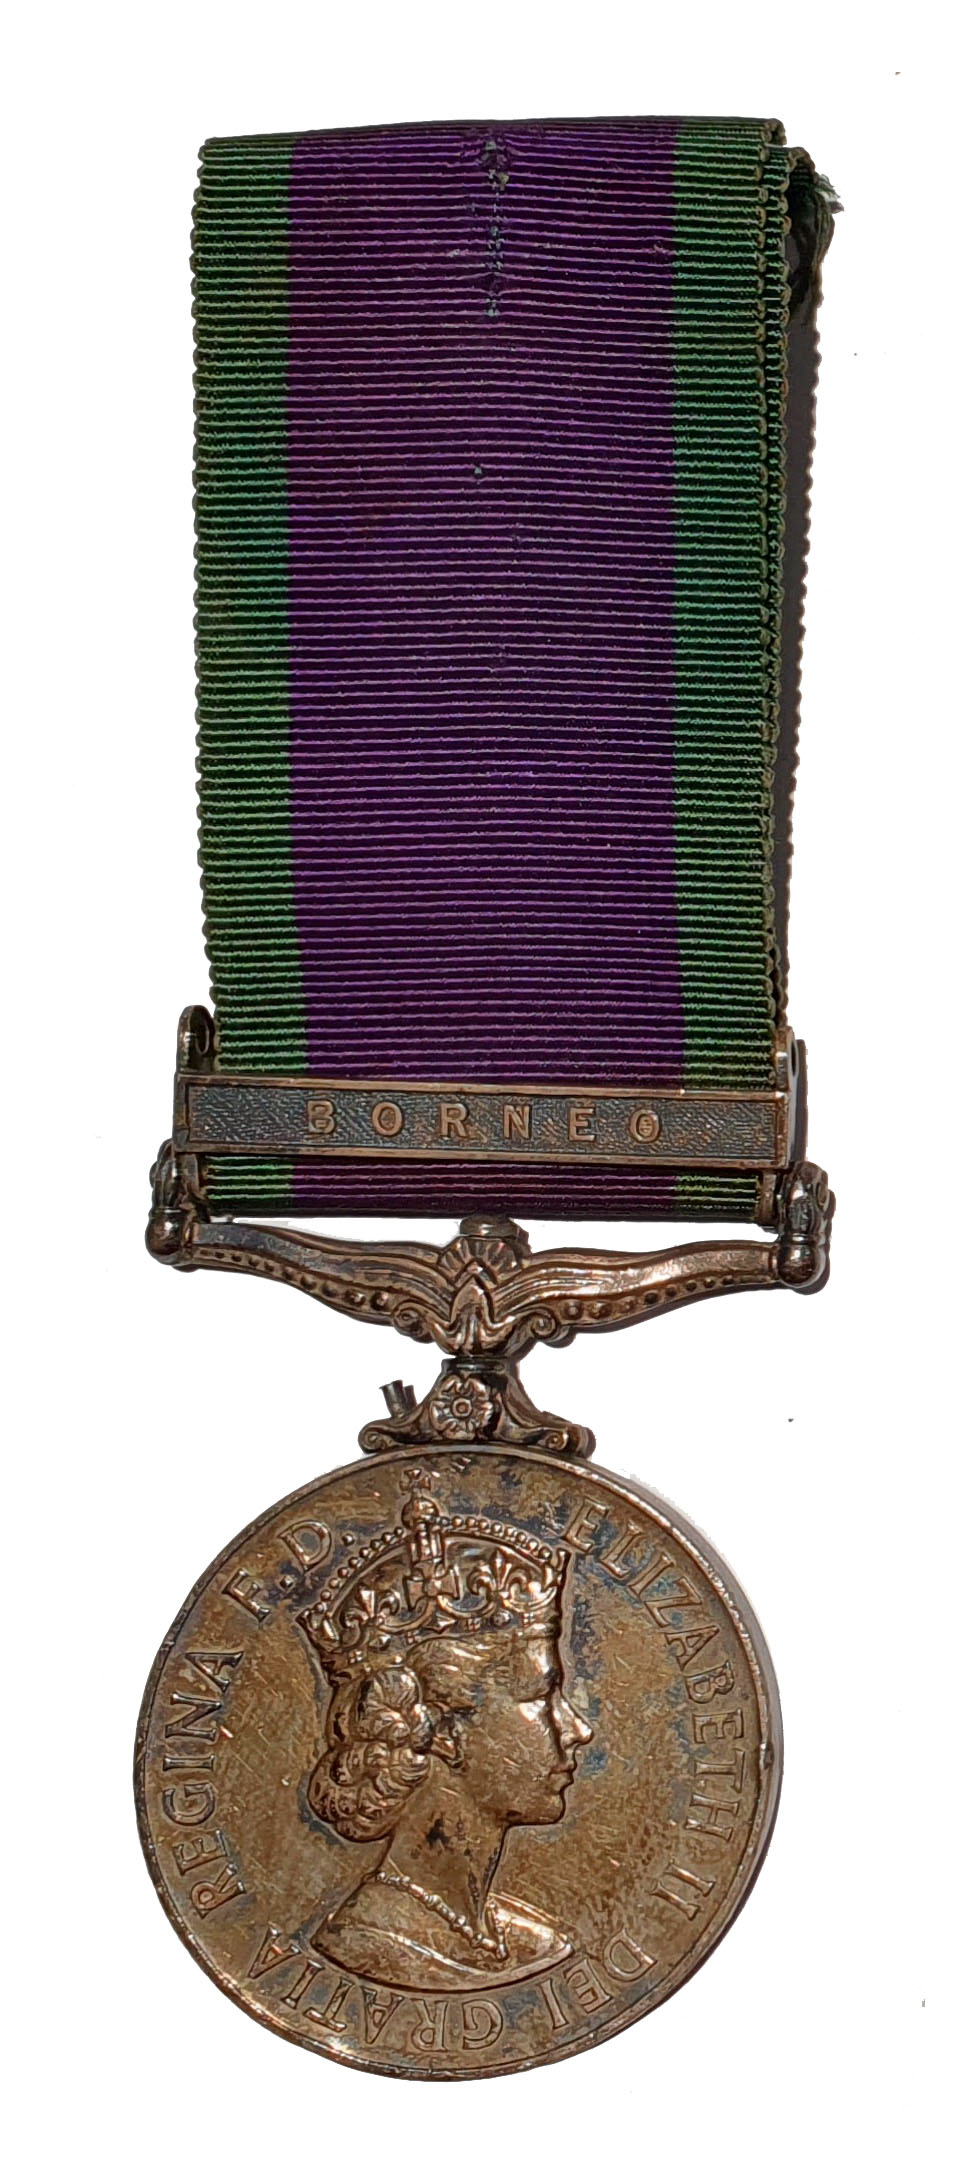 General Service Medal, 1962-2007, one clasp, Borneo awarded to Gunner C.T. Bradshaw